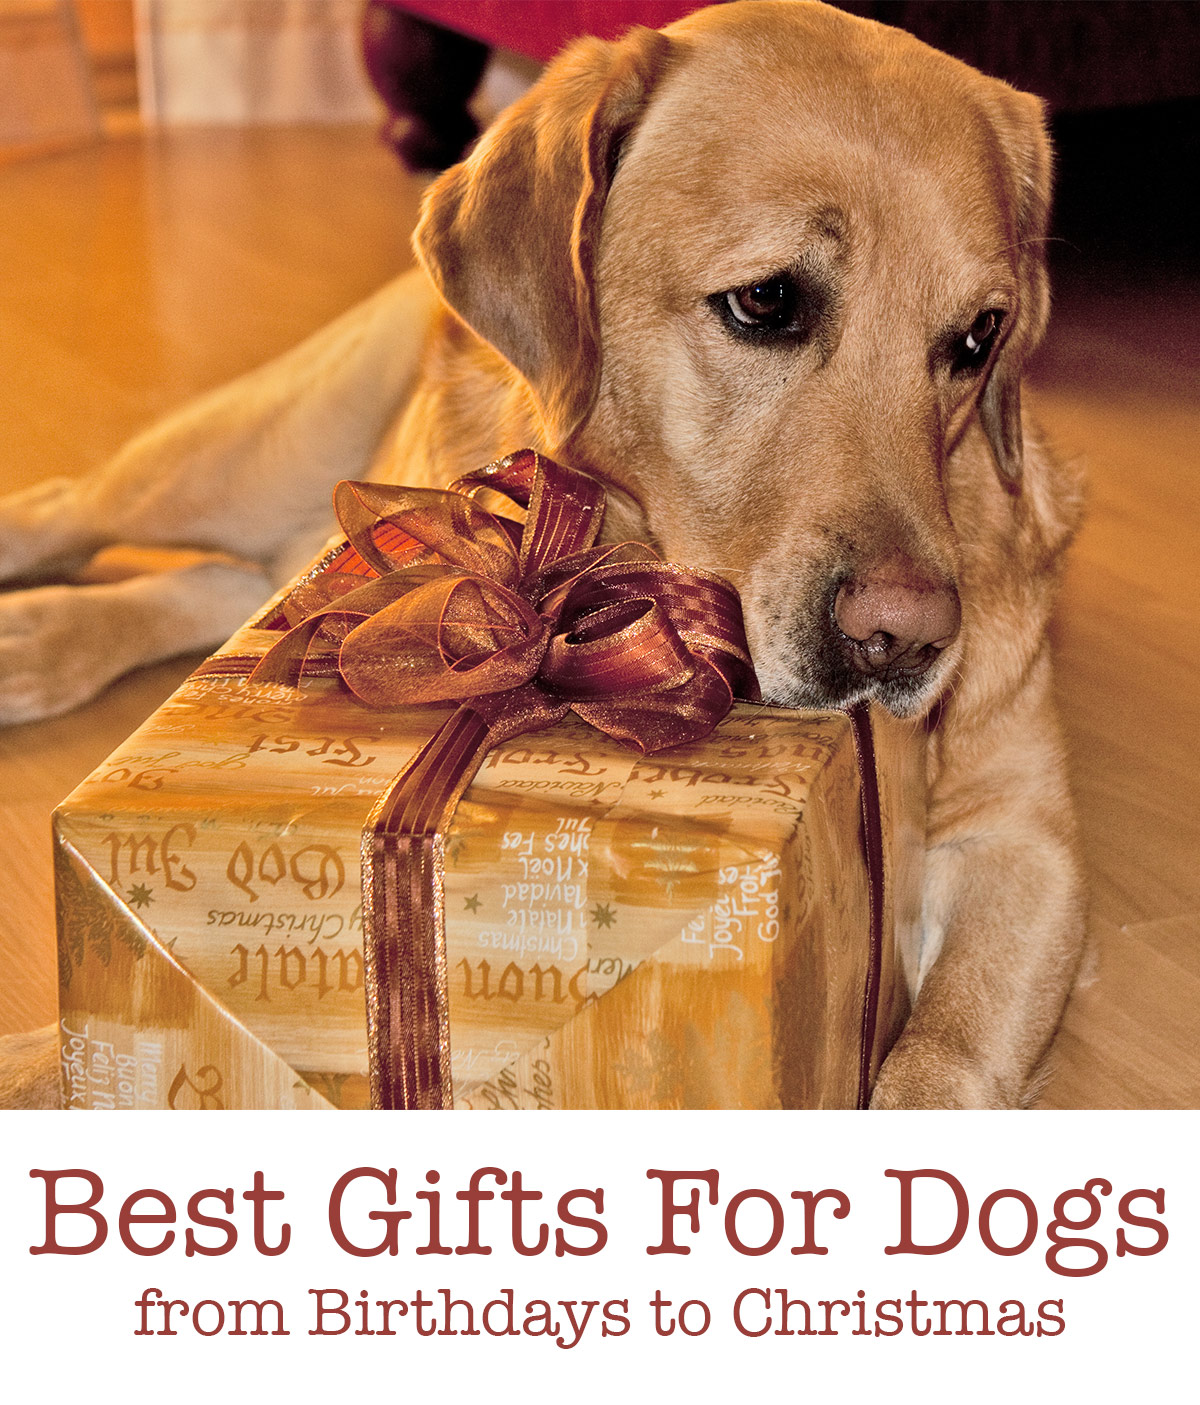 Best Dog Gifts For Christmas, Birthdays And More